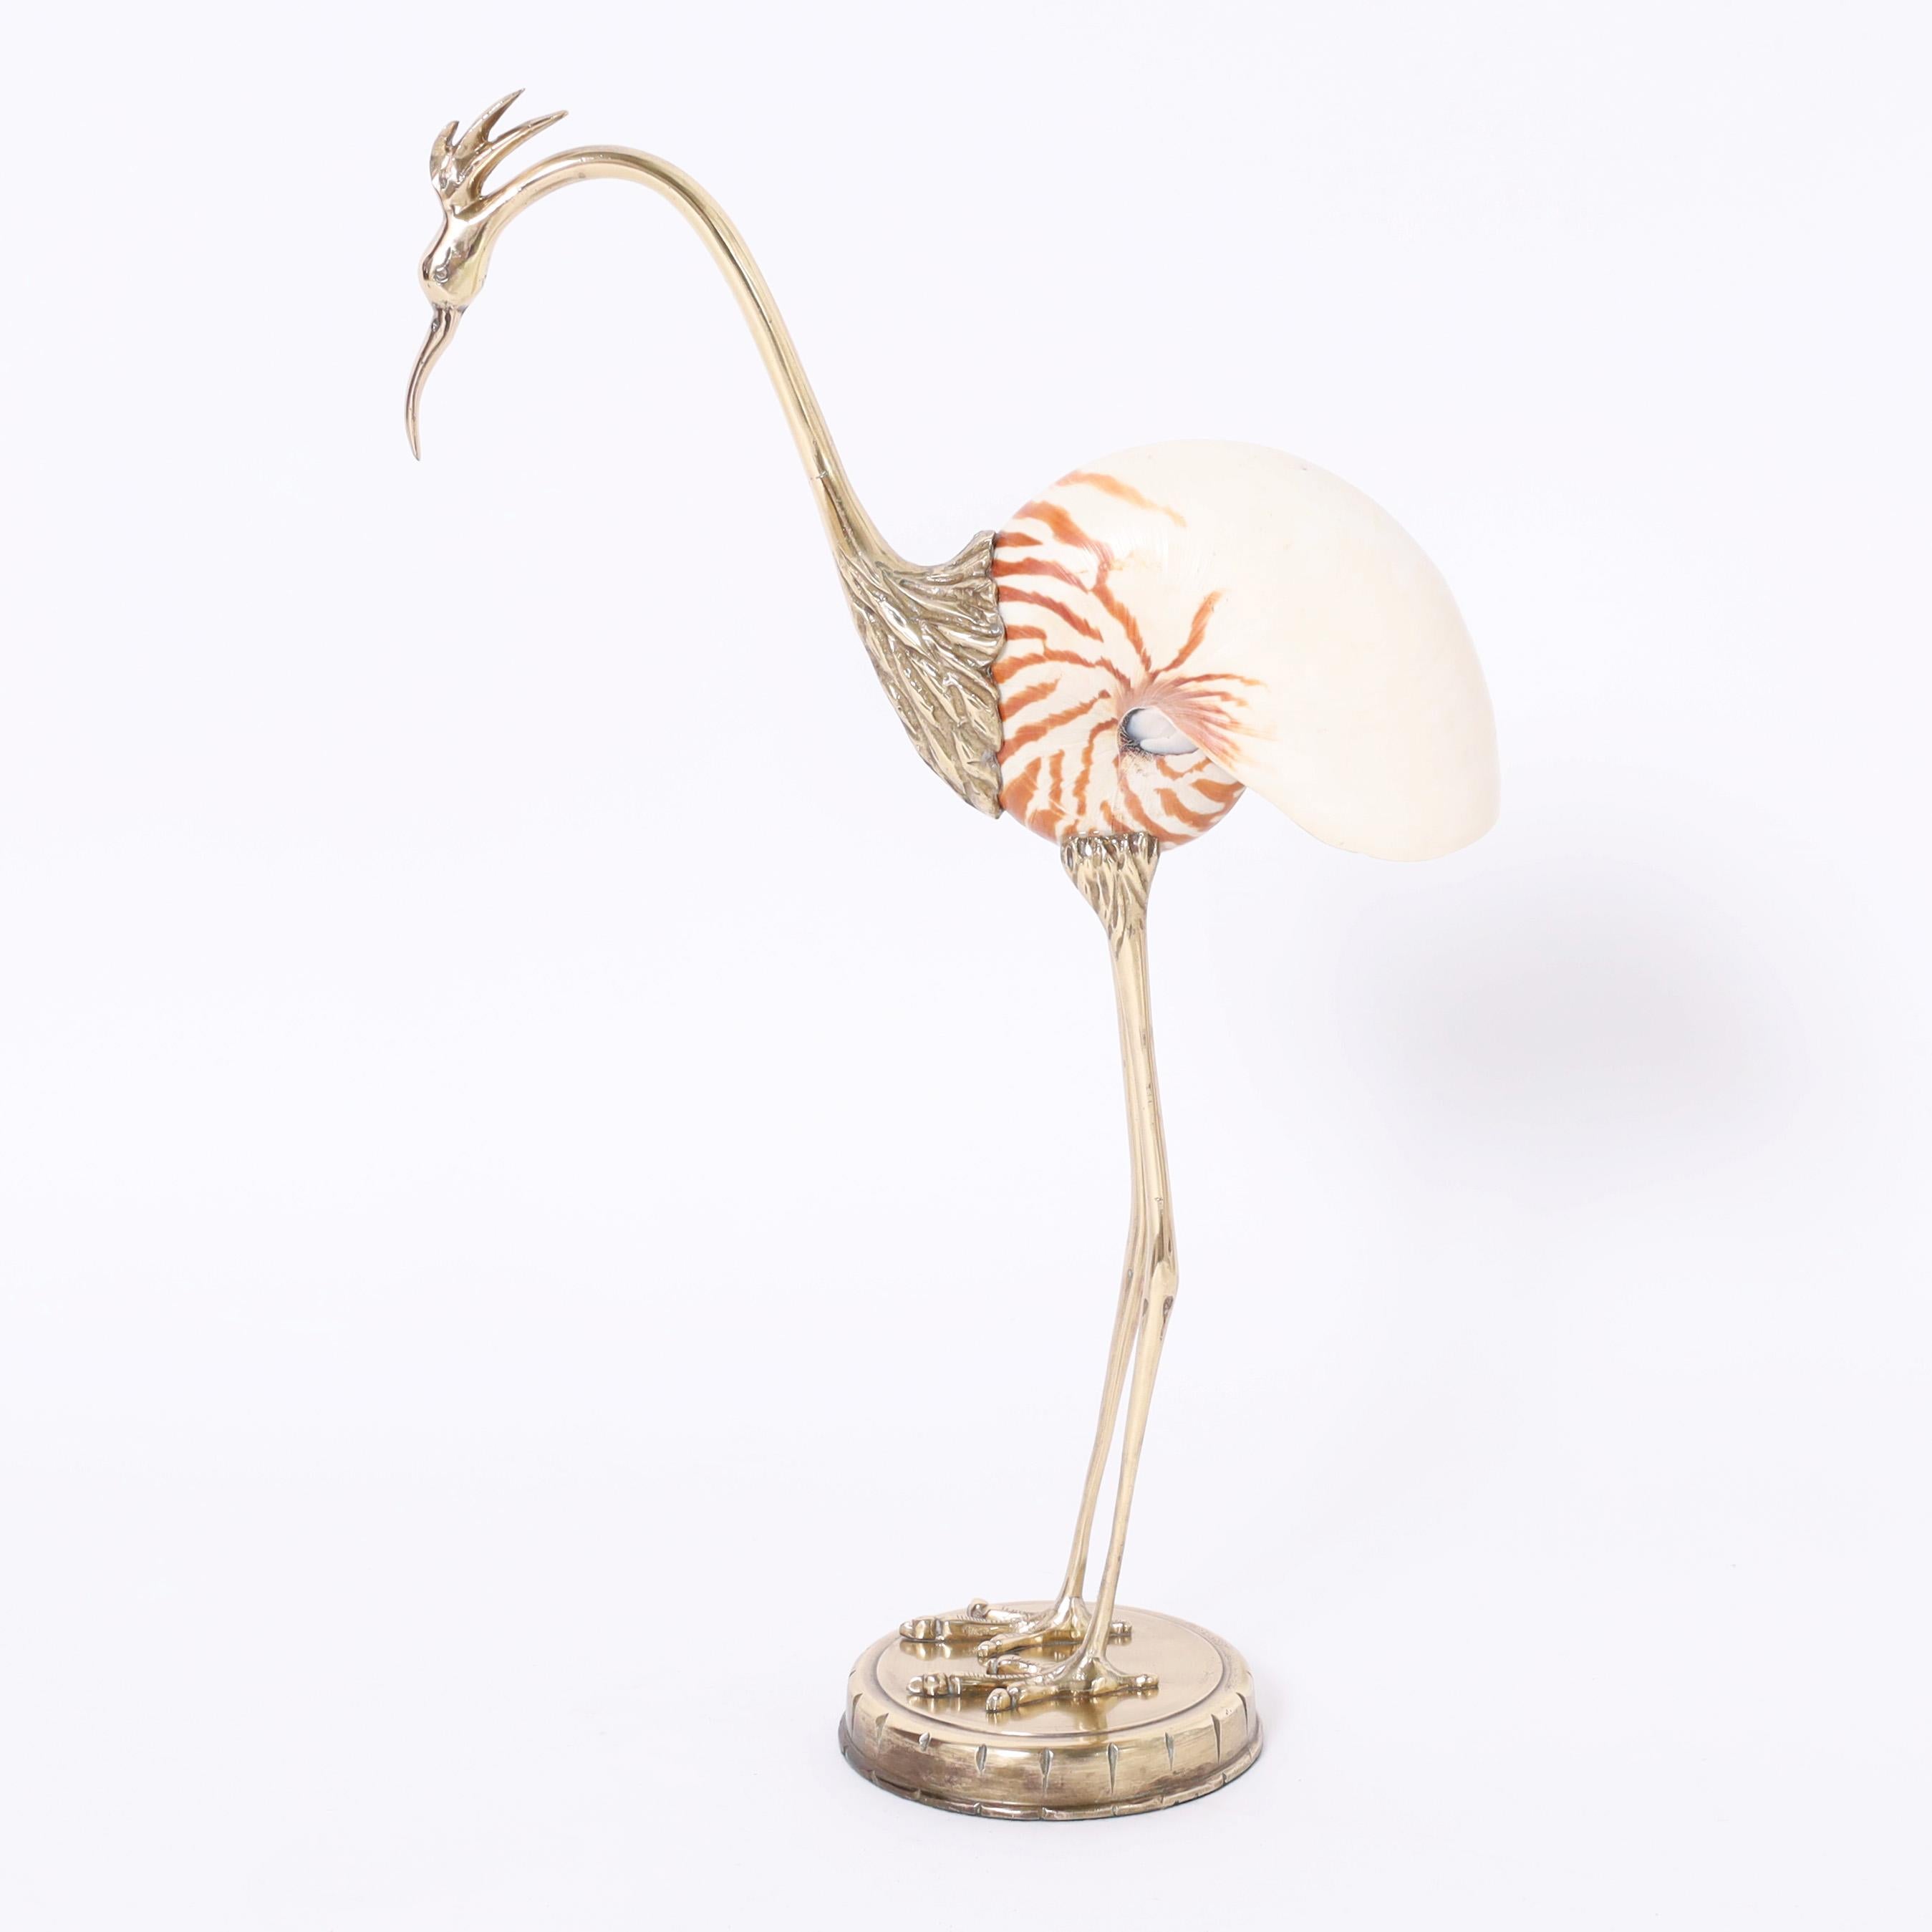 Vintage Italian Heron or Stork sculpture crafted in brass and featuring a nautilus shell body in the style of Binazzi.